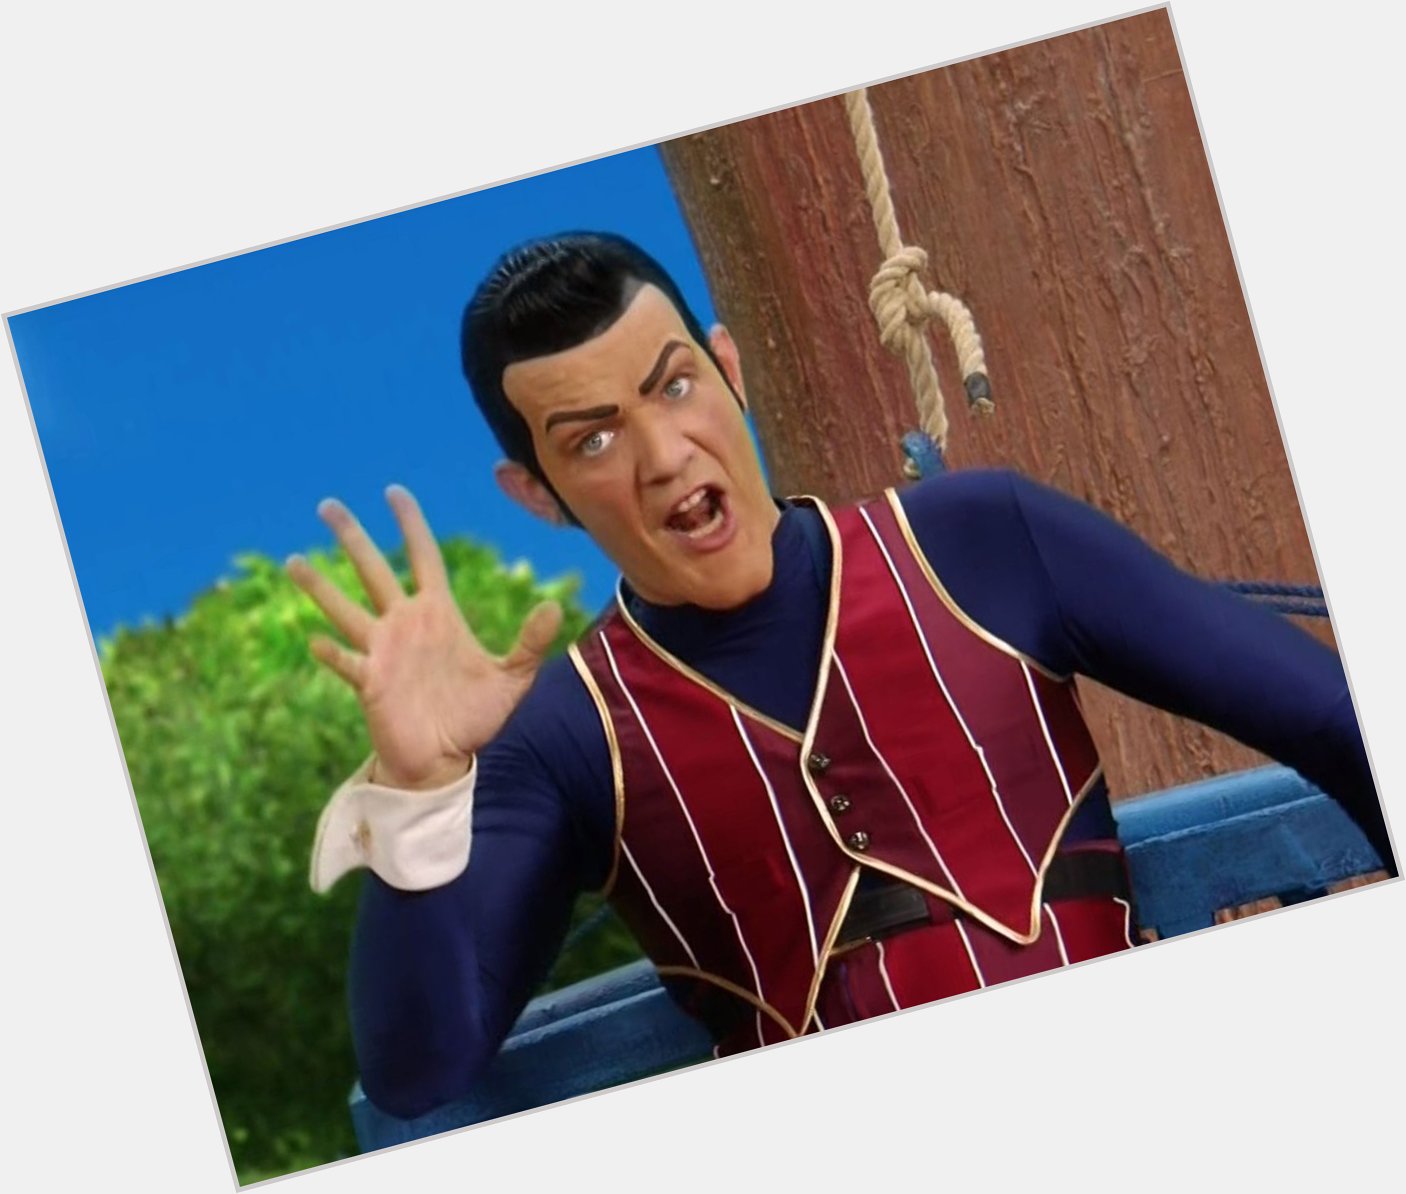 Happy 46th birthday to actor Who played Robbie rotten From lazy town the late Stefán Karl Stefánsson
Your dude. 